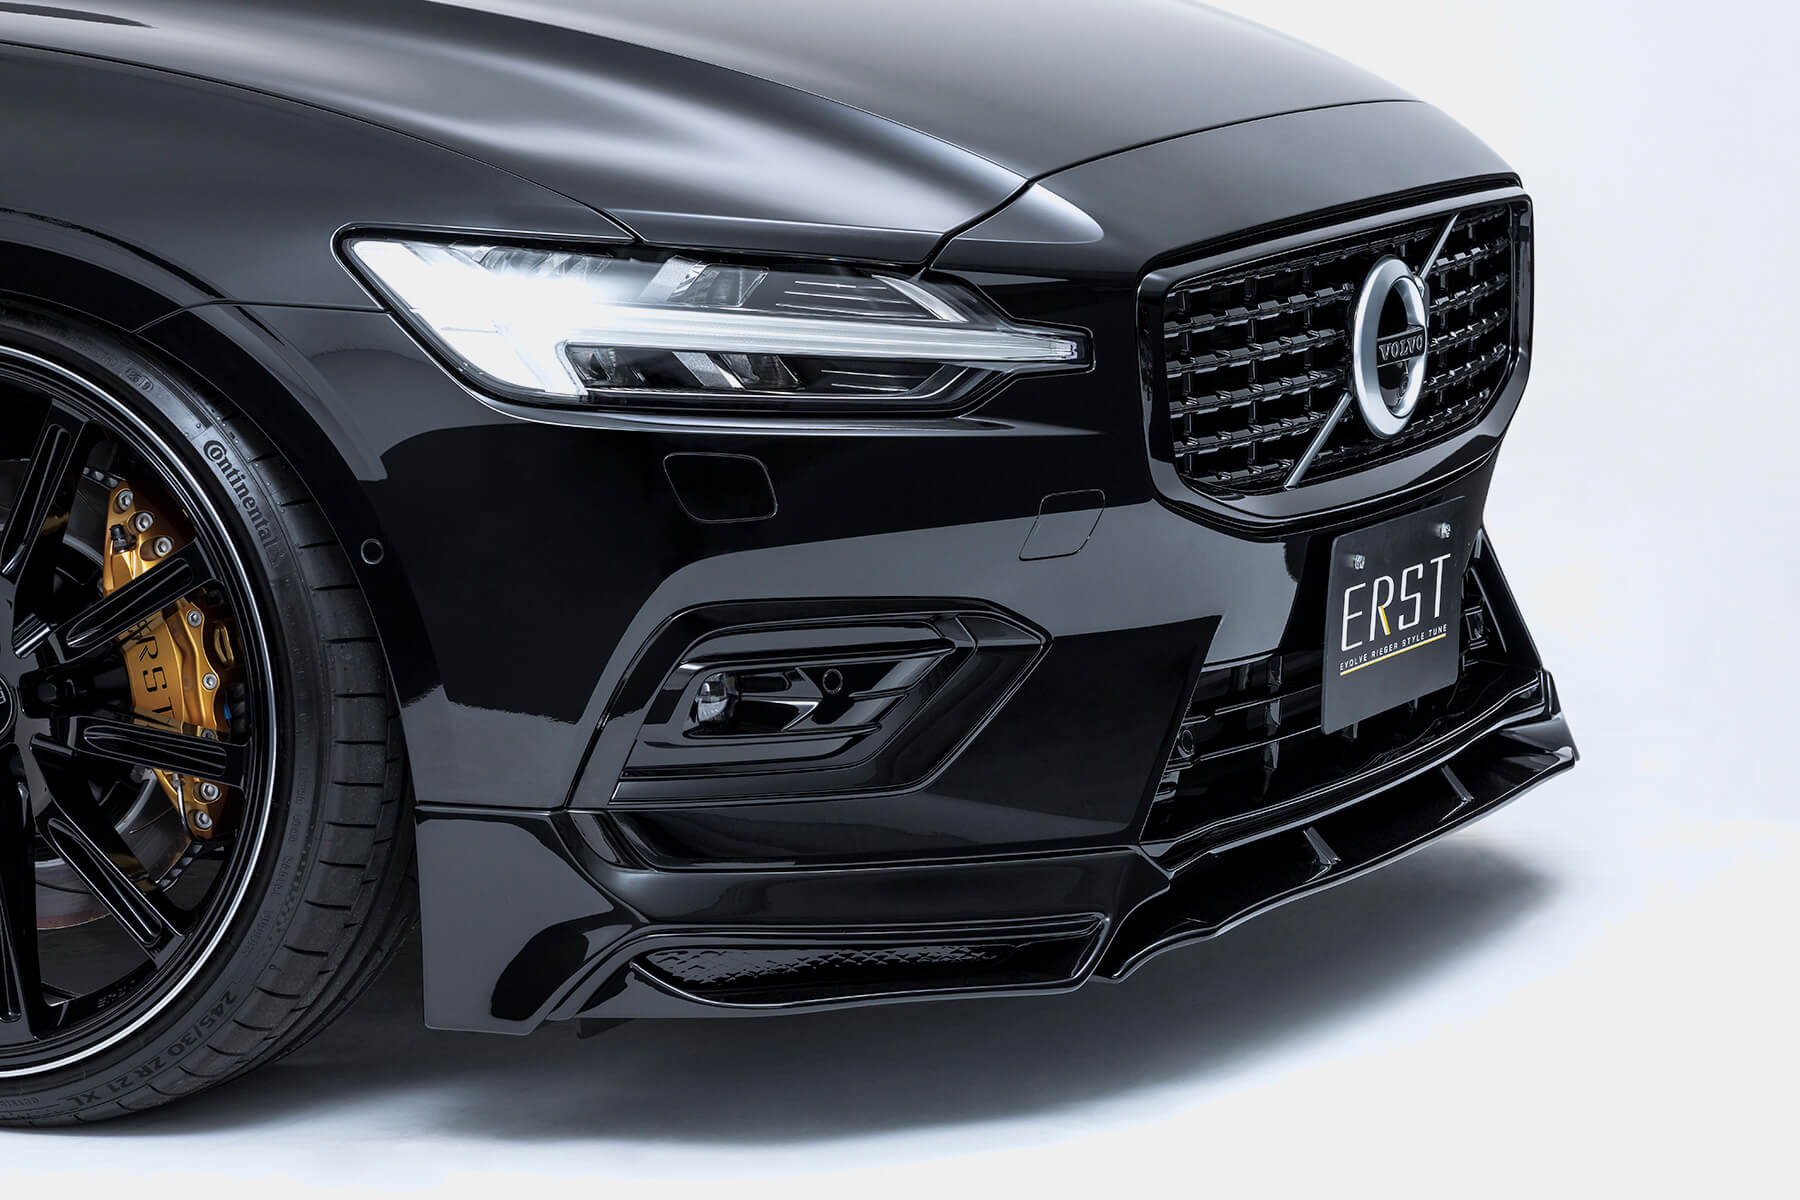 Check our price and buy ERST body kit for Volvo S60!